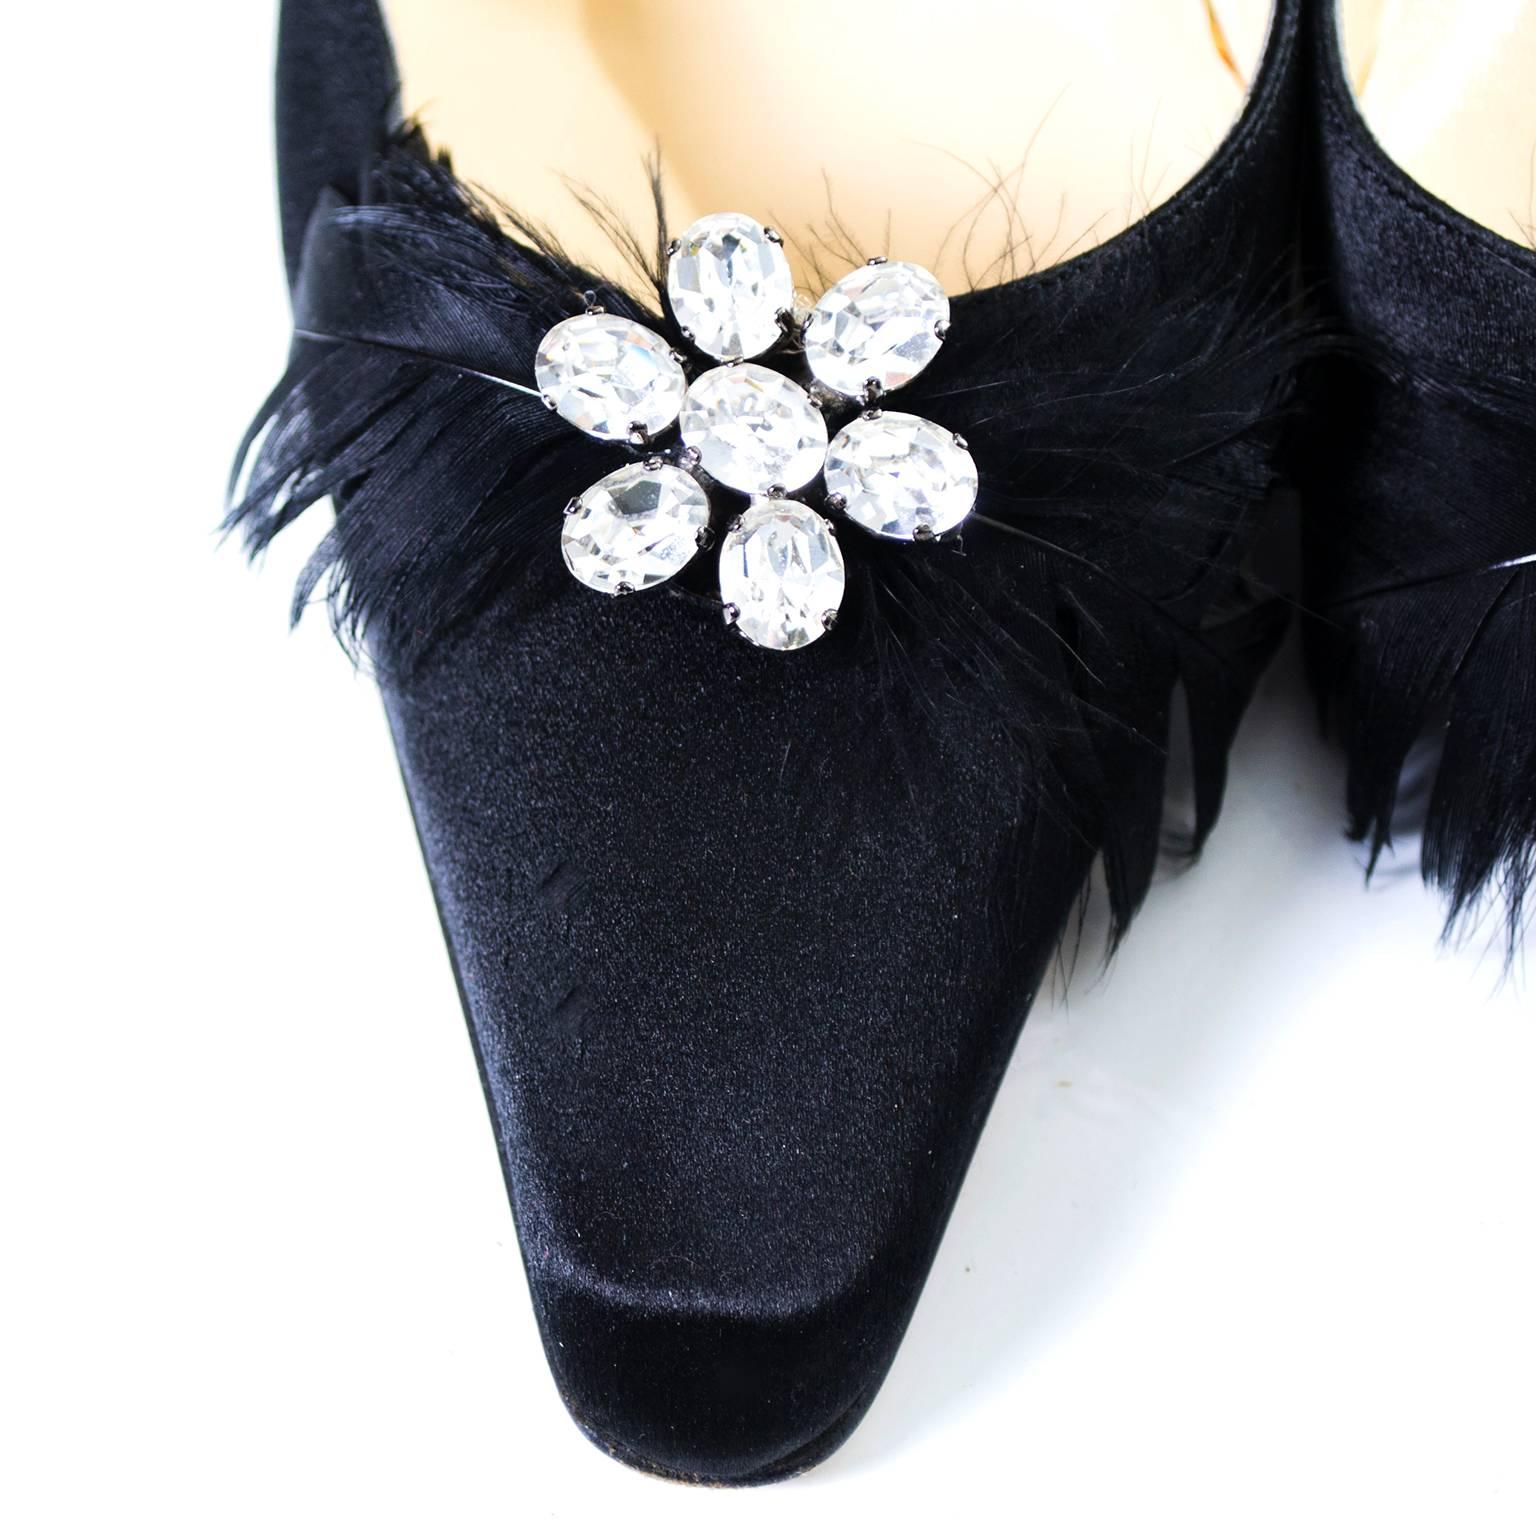 These black satin Jimmy Choo shoes are perfect for the holidays! These designer heels have pretty black feathers and rhinestones and are labeled a size 37.  The shoes are in excellent condition with only minor sole scuffs. The heels are 4.25